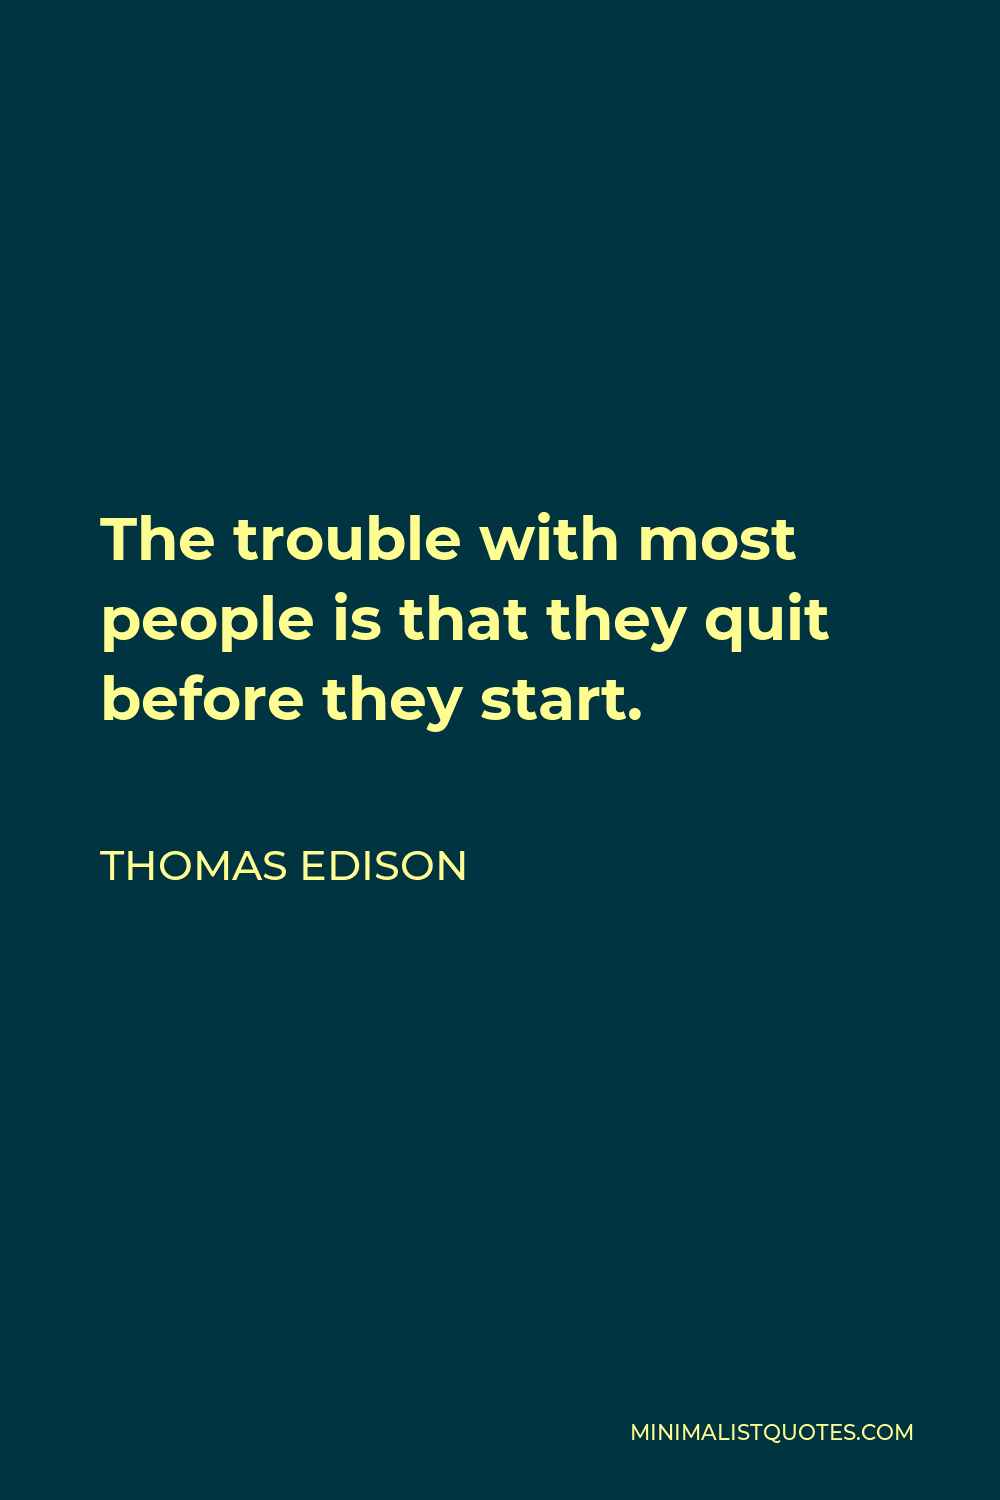 Thomas Edison Quote - The trouble with most people is that they quit before they start.